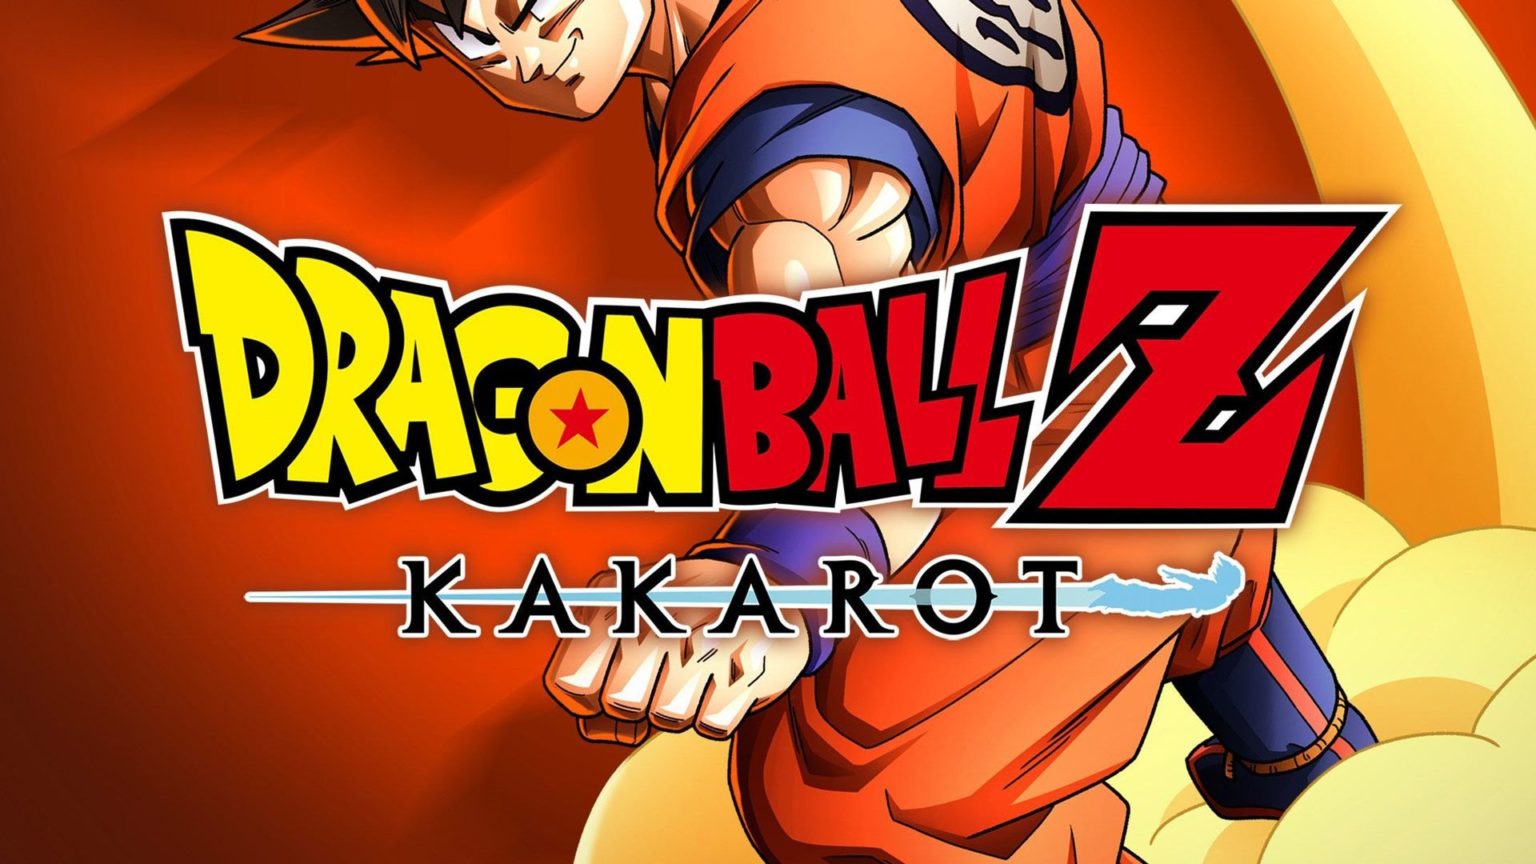 Dragon Ball Z Kakarot 1.11 Jumps out: Patch notes & Latest changes